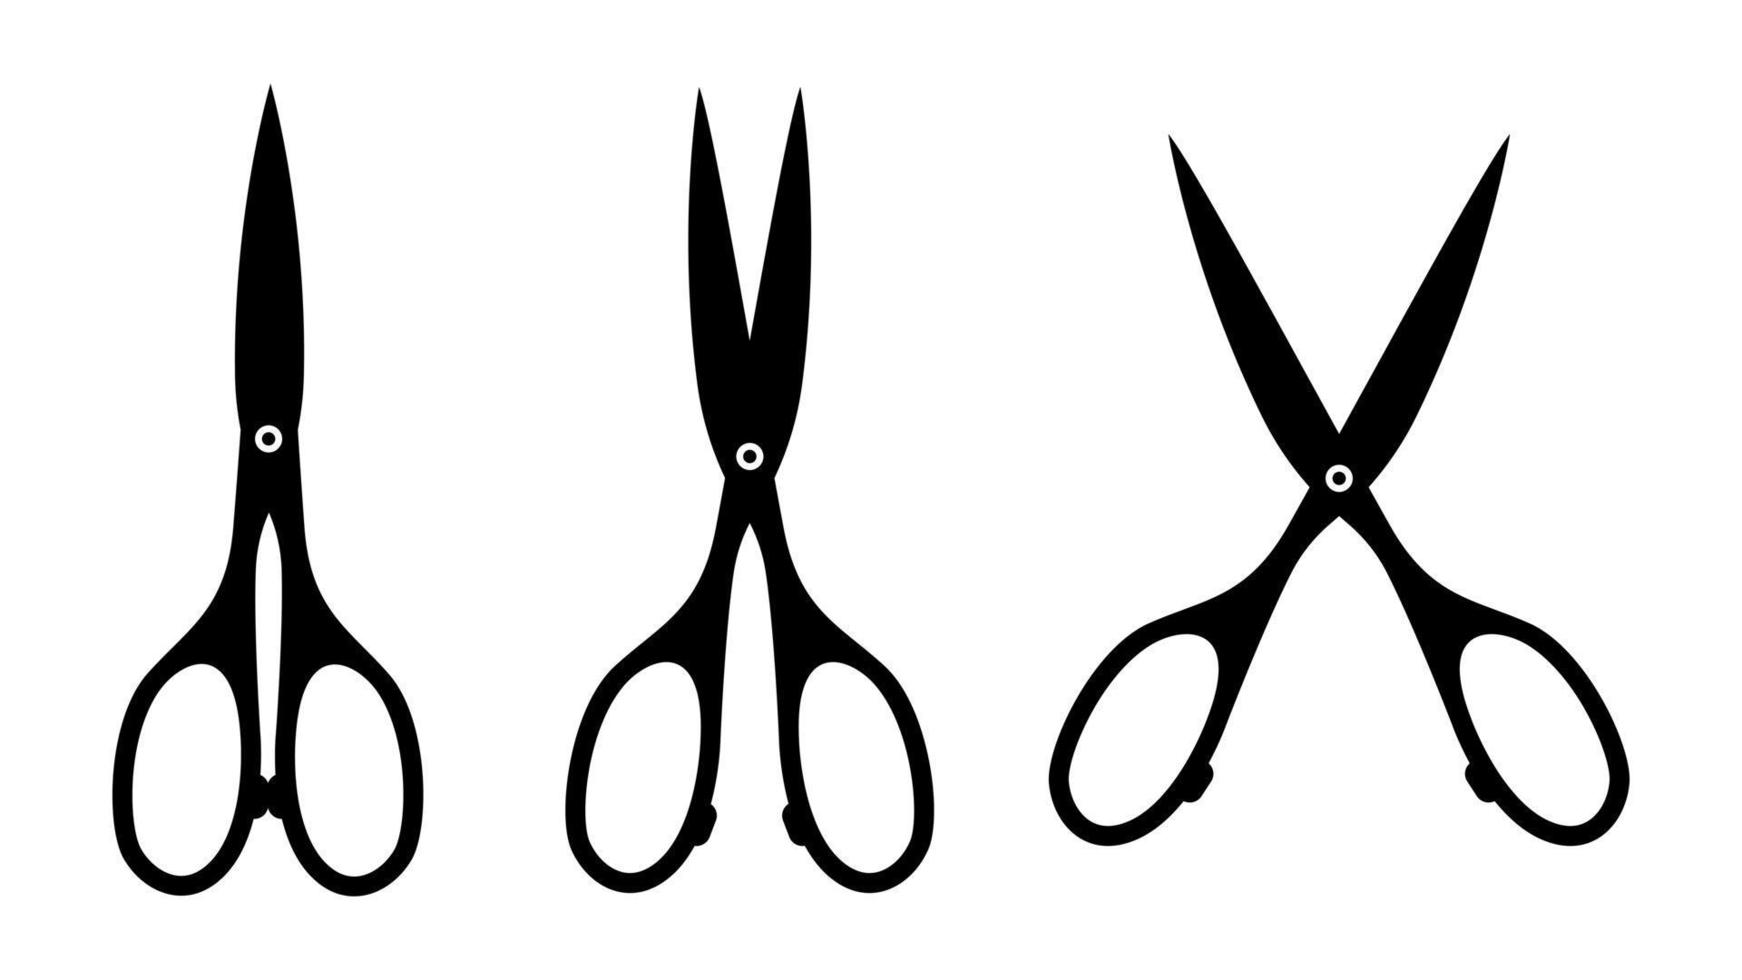 Black scissors icon. Sharp tool silhouette for barber shop and sewing workshop user friendly design with different disclosure vector blades